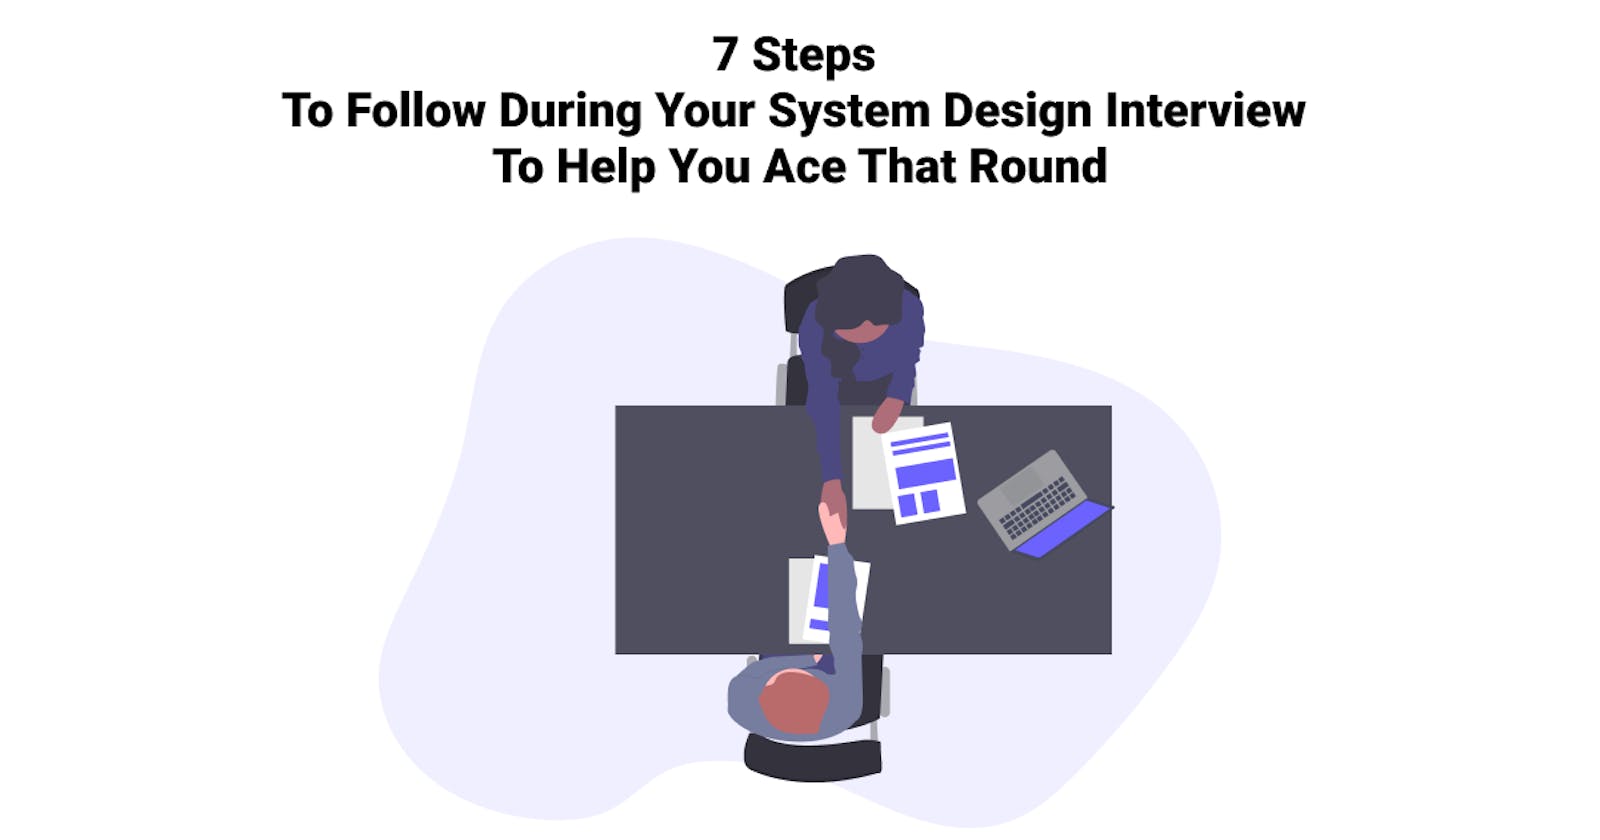 7 Steps To Follow During Your System Design Interview To Help You Ace That Round